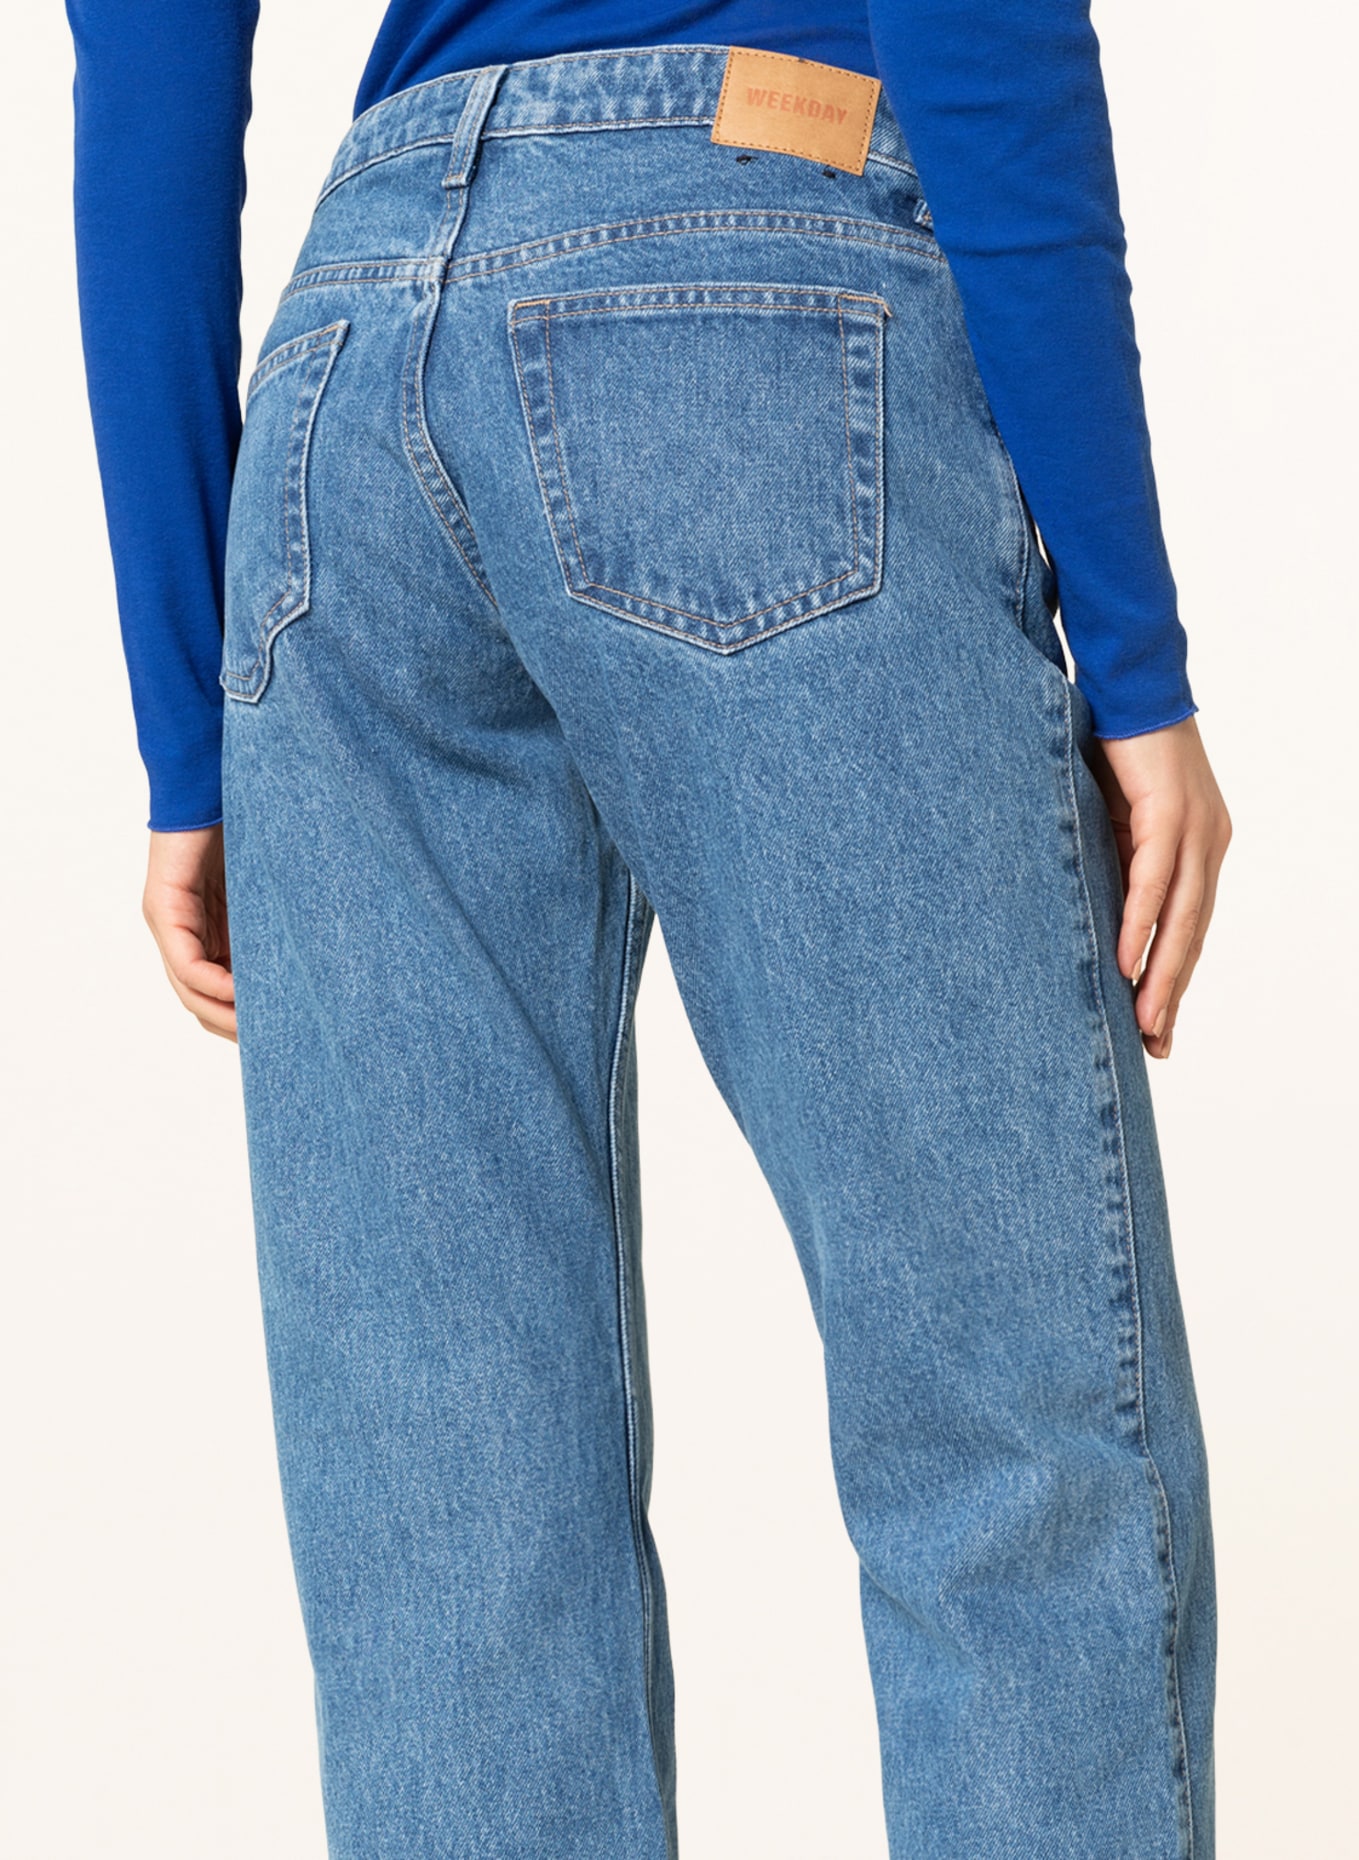 WEEKDAY Straight jeans, Color: 75-101 Blue Medium Dusty Harper Blue (Image 5)